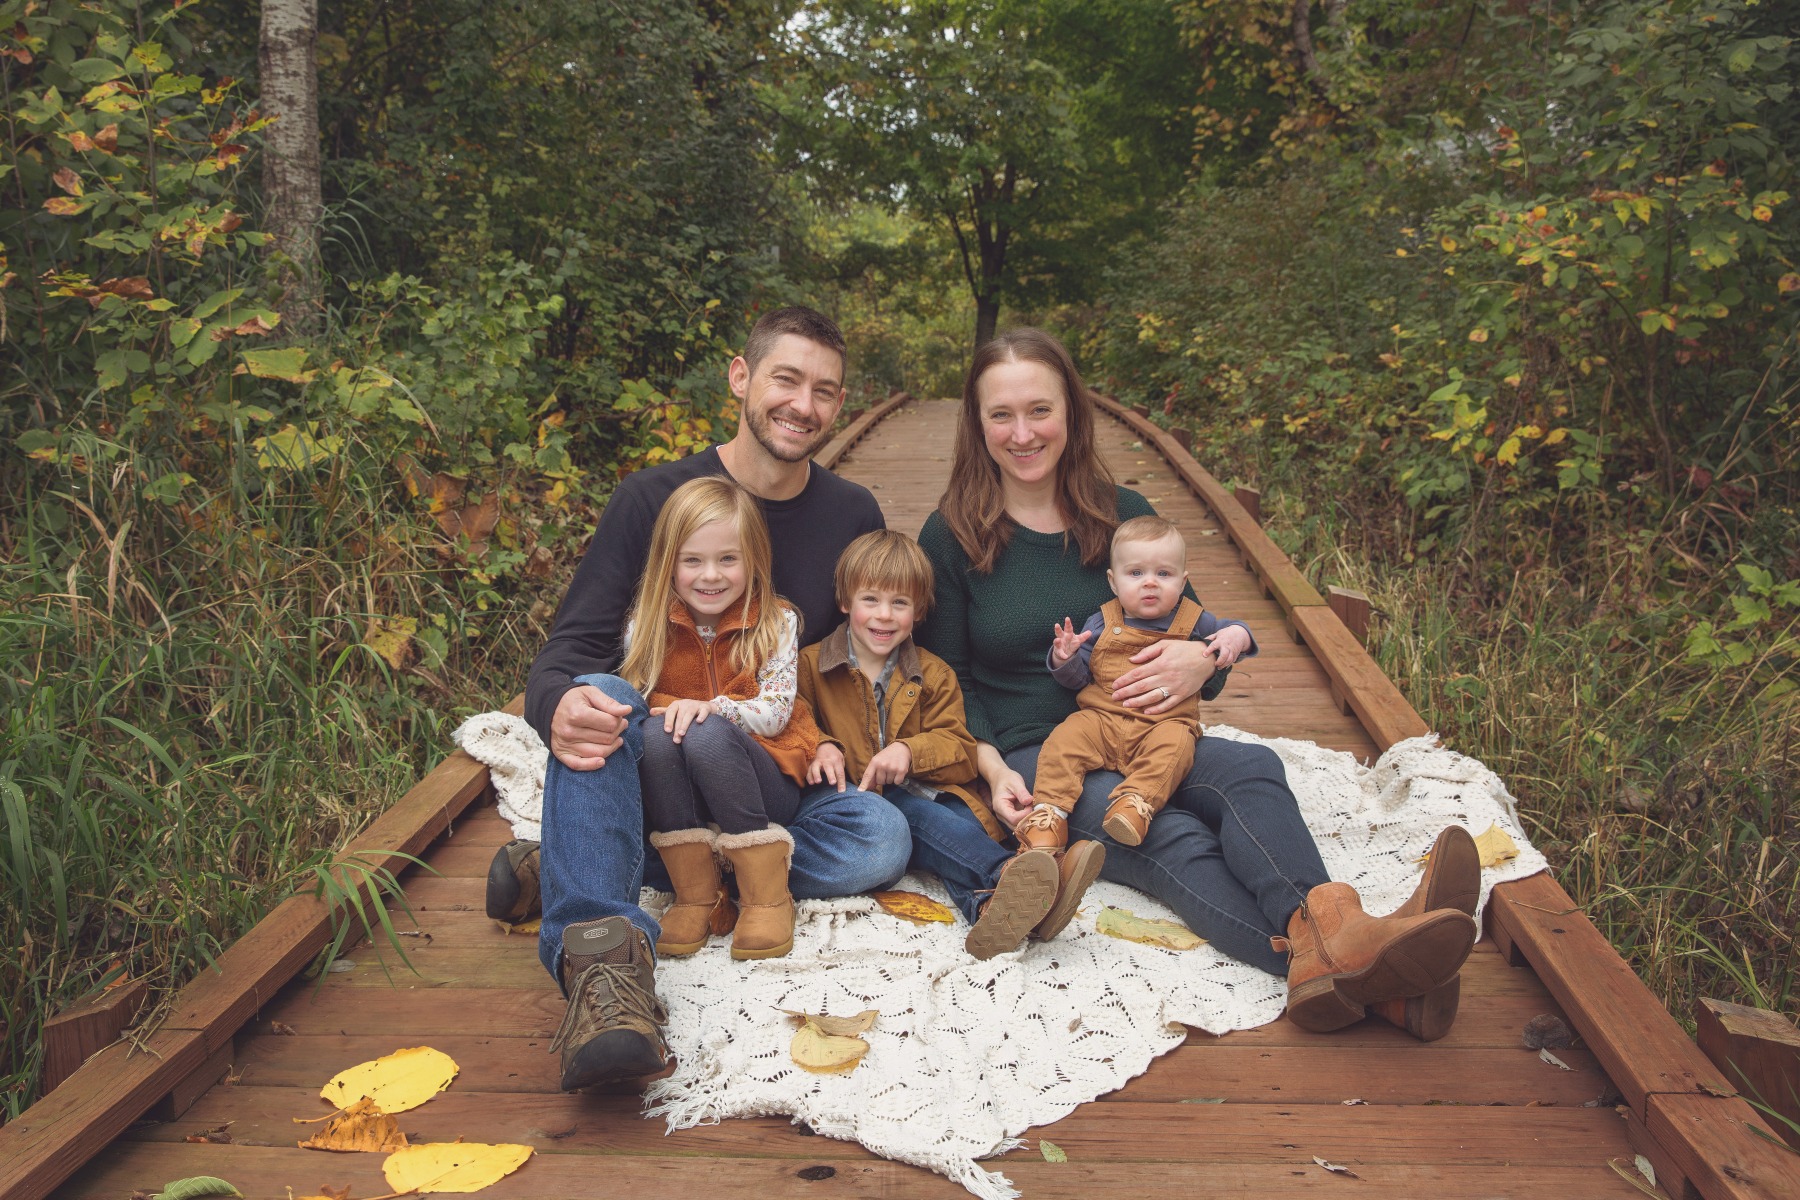 young family of 5 sit together on a wooden boardwalk